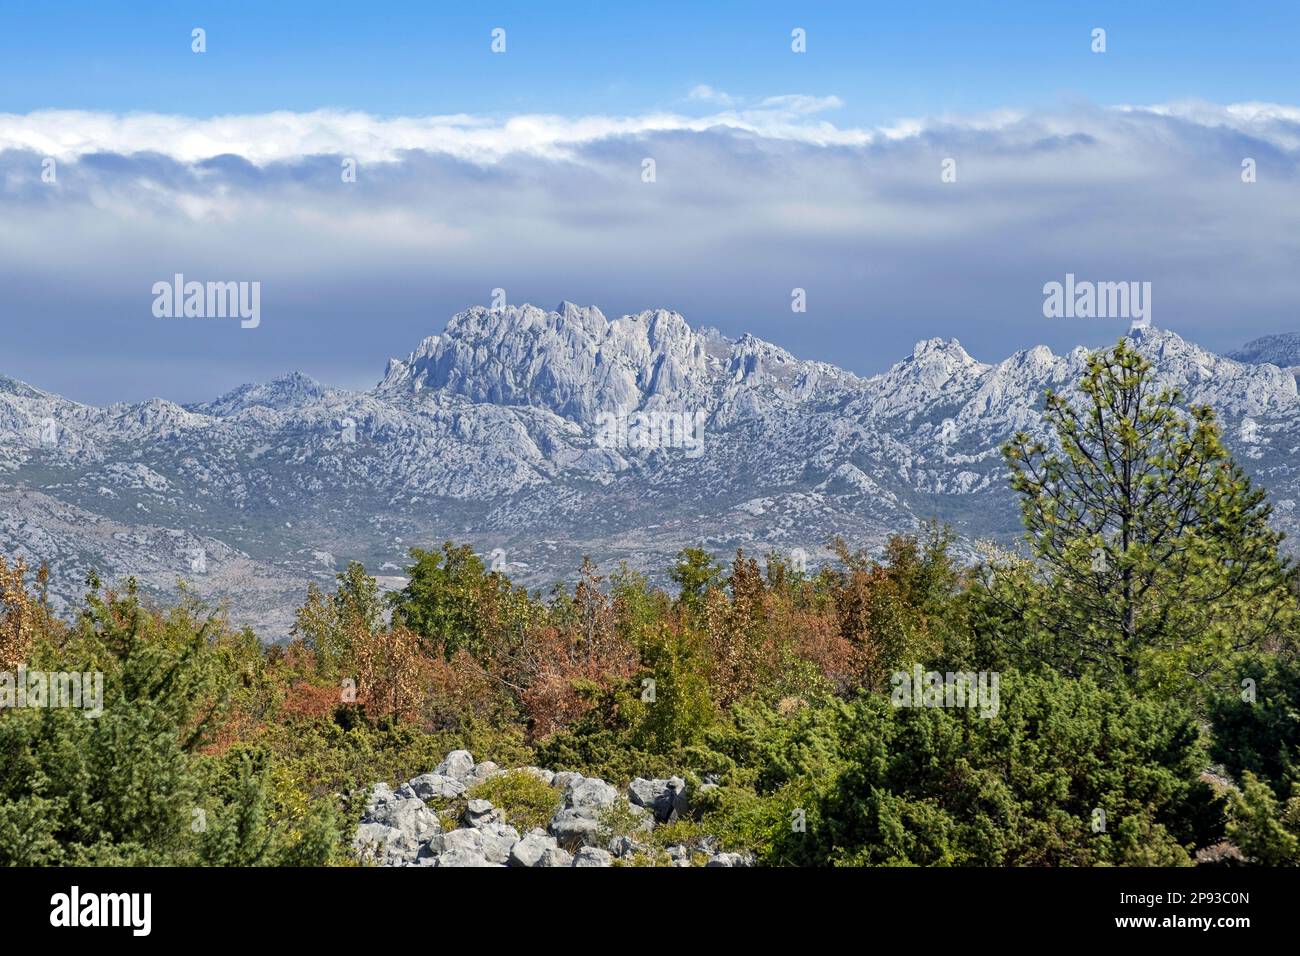 View over Velebit, largest mountain range in Croatia and part of the Dinaric Alps / Dinarides along the Adriatic coast Stock Photo